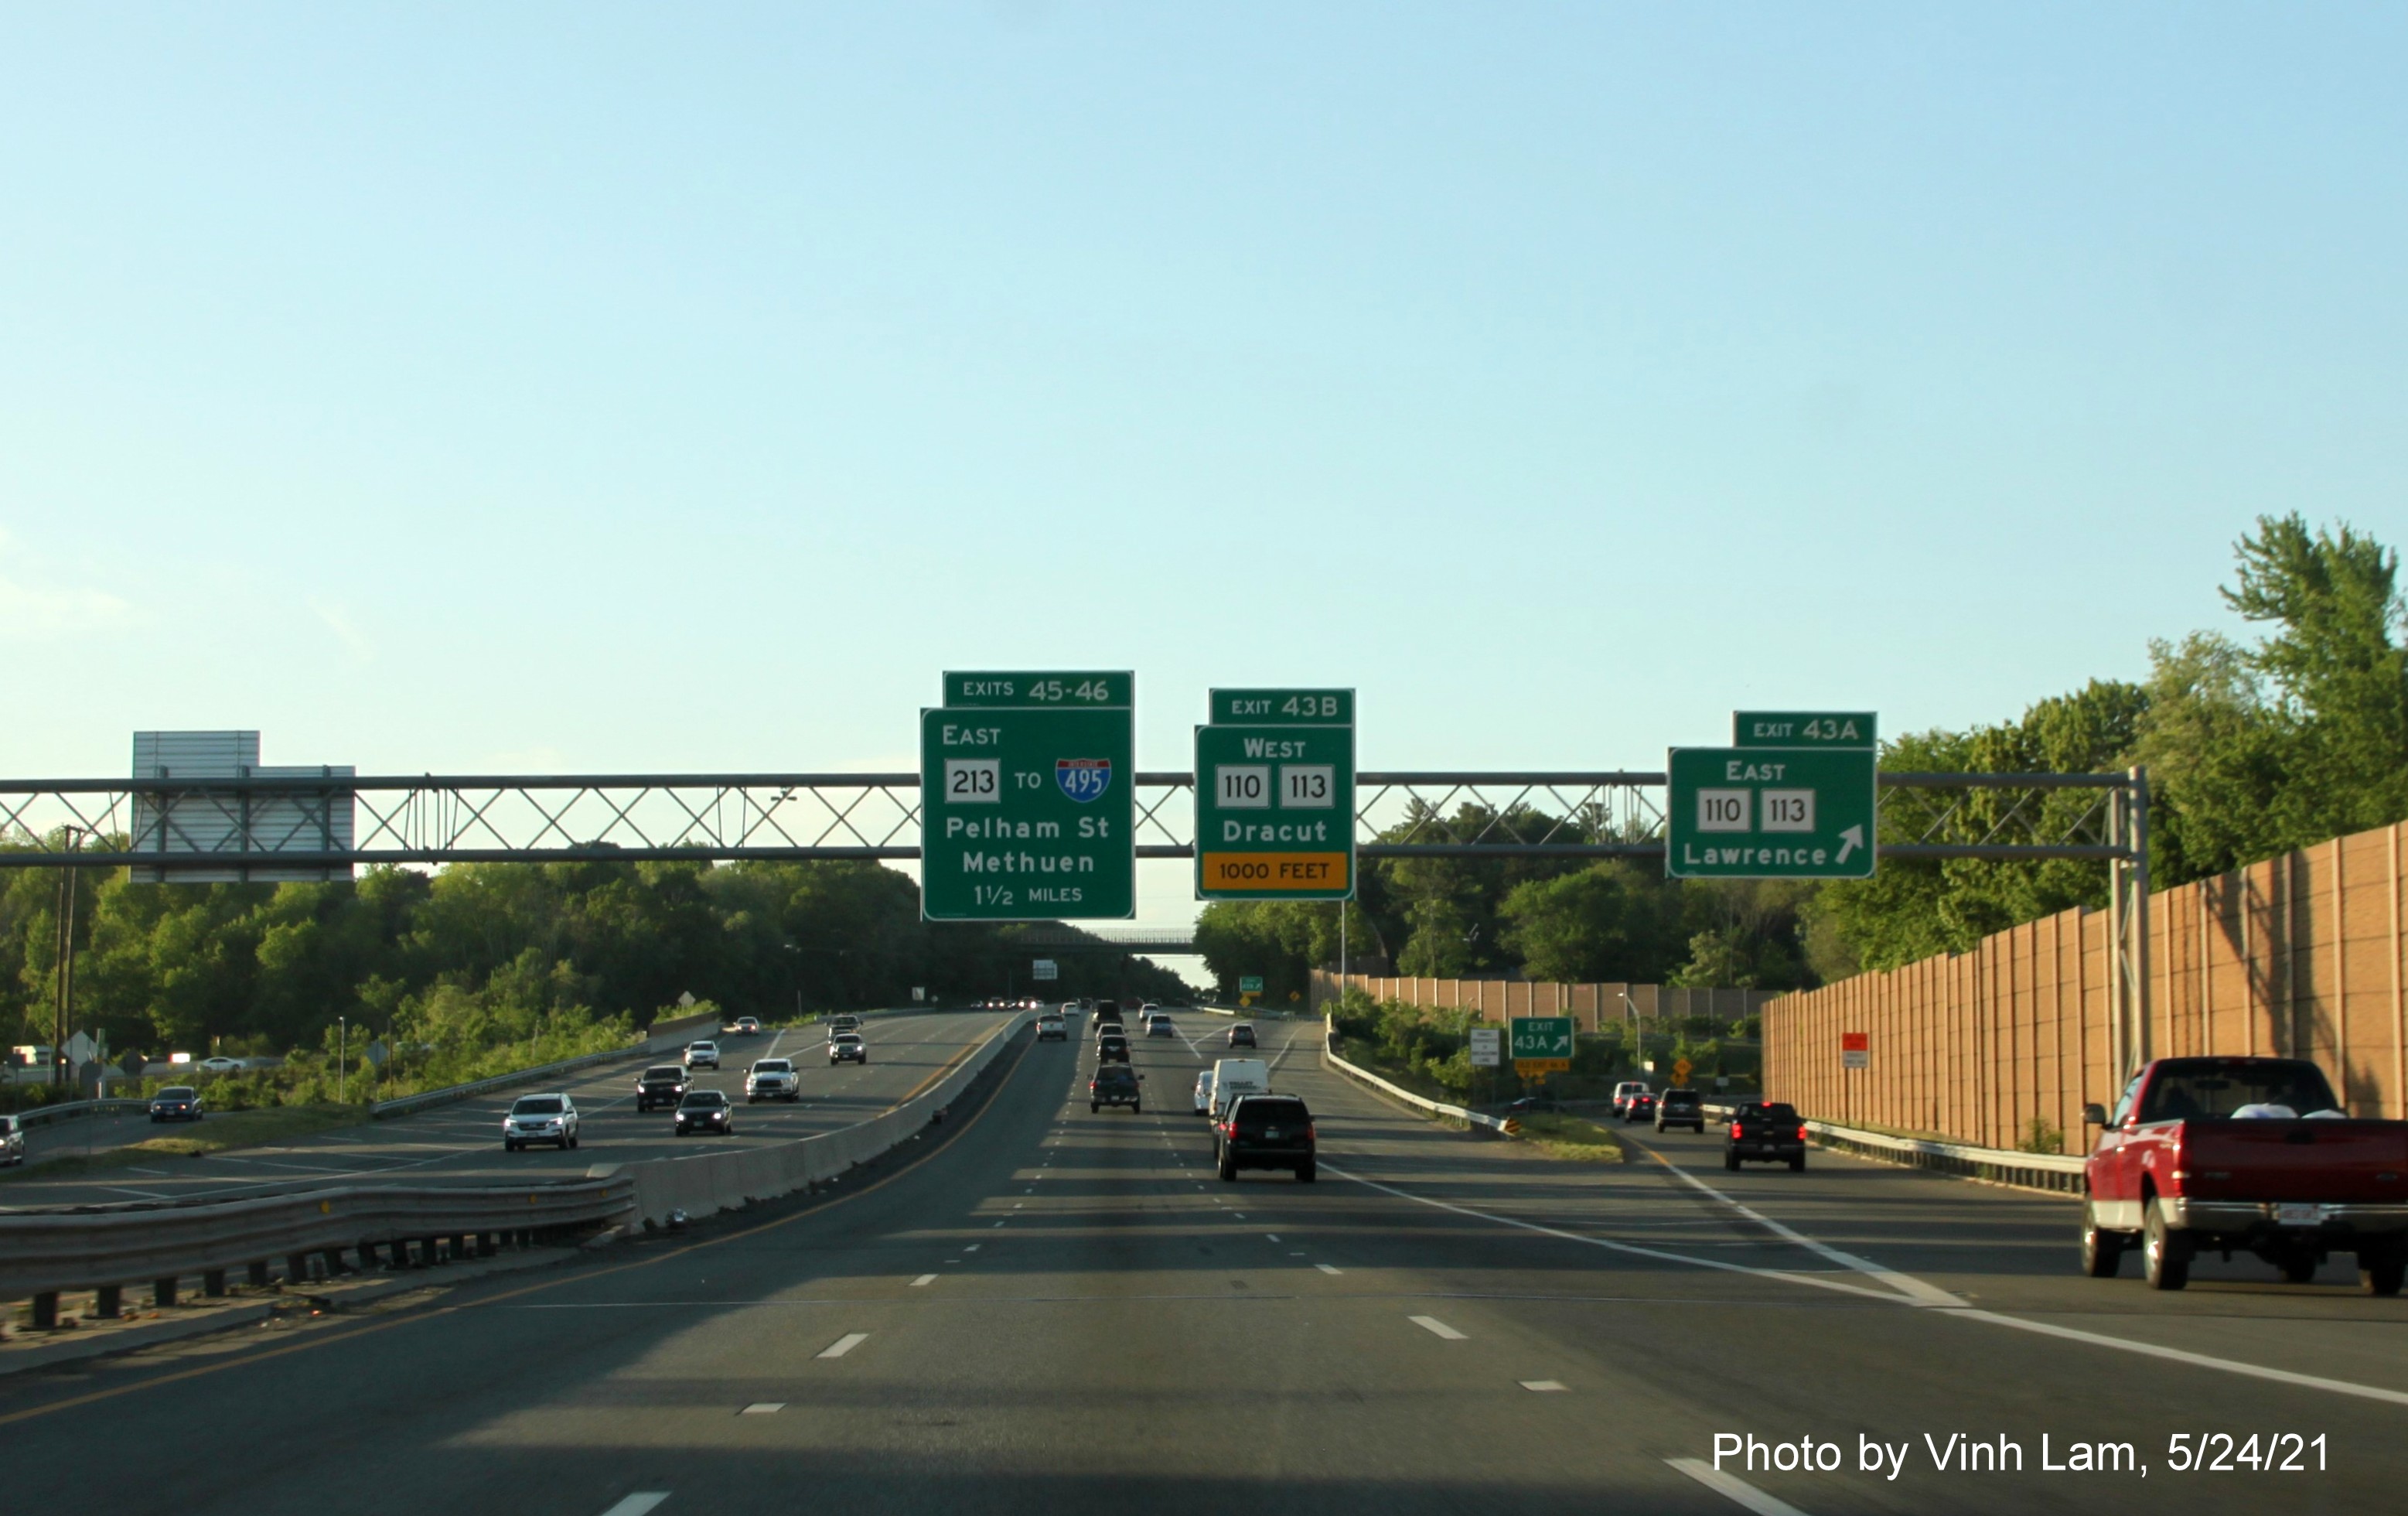 Image of overhead signage at ramp for MA 110/MA 113 East exit with new milepost based exit numbers on I-93 North in Andover, by Vinh Lam, May 2021